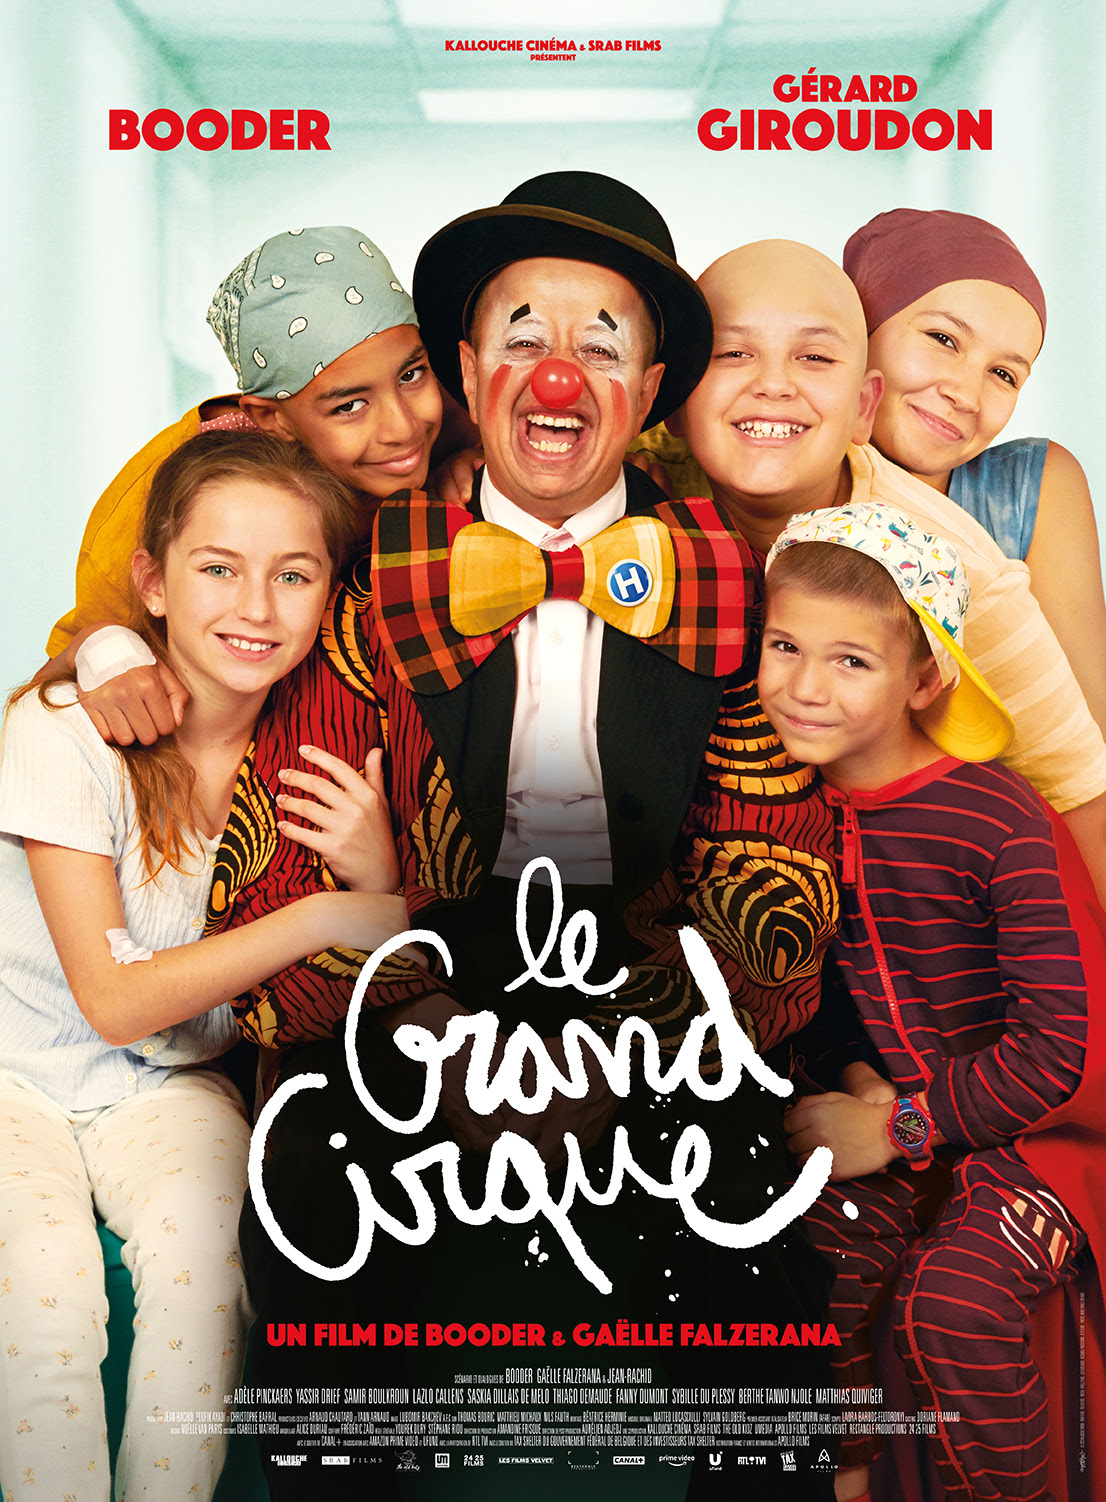 Le Grand cirque - film 2023 streaming VF gratuit complet